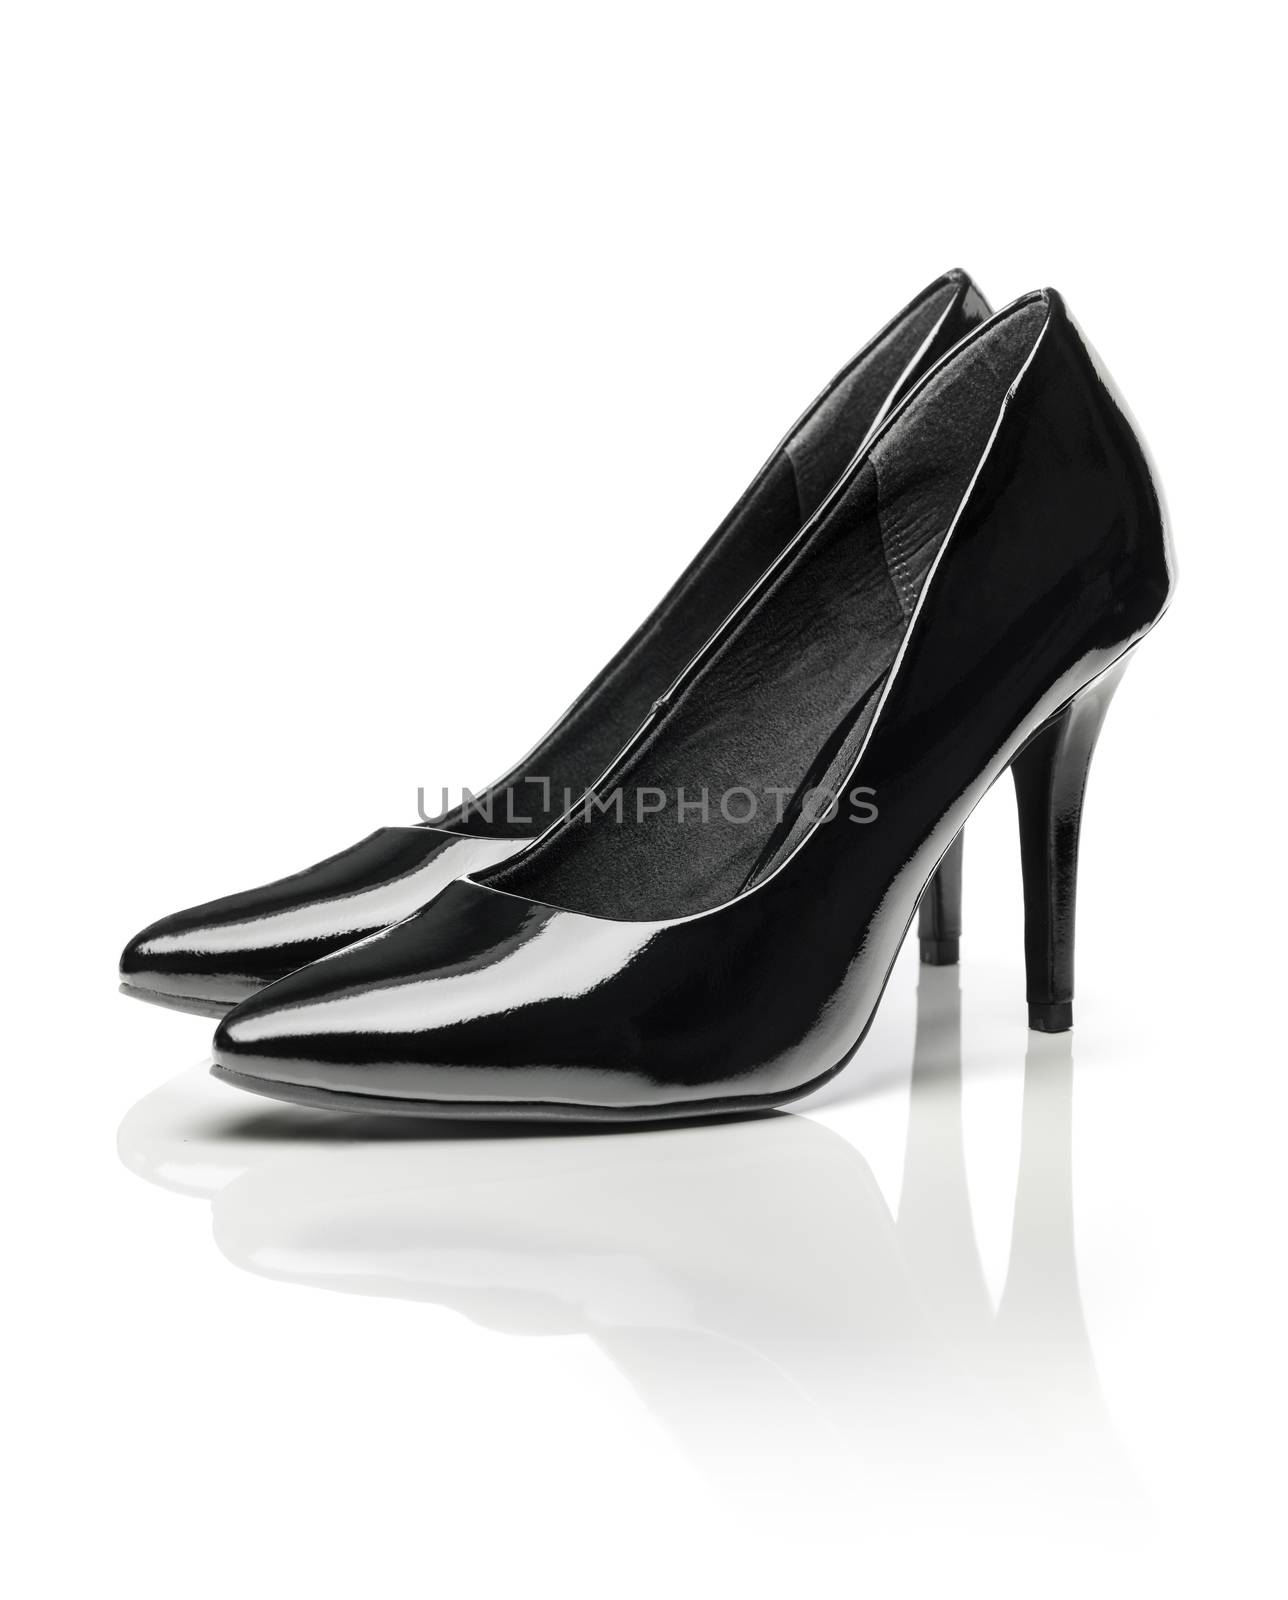 Black Pumps by Stocksnapper